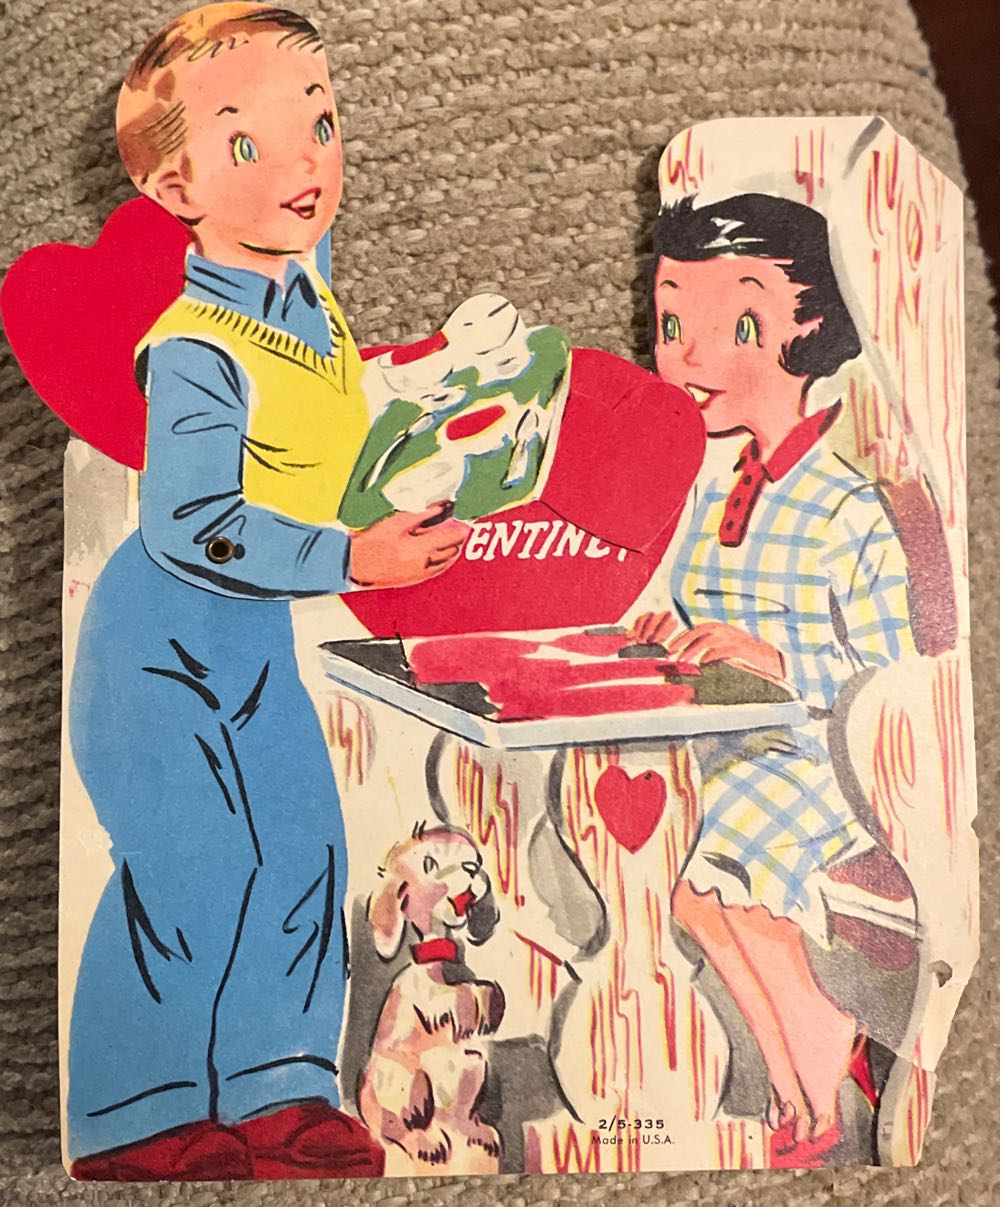 Valentine - Flat - Mechanical - Boy Serving Girl In Restaurant - 2/5 335 - Mechanical (Valentine) ornament collectible - Main Image 1